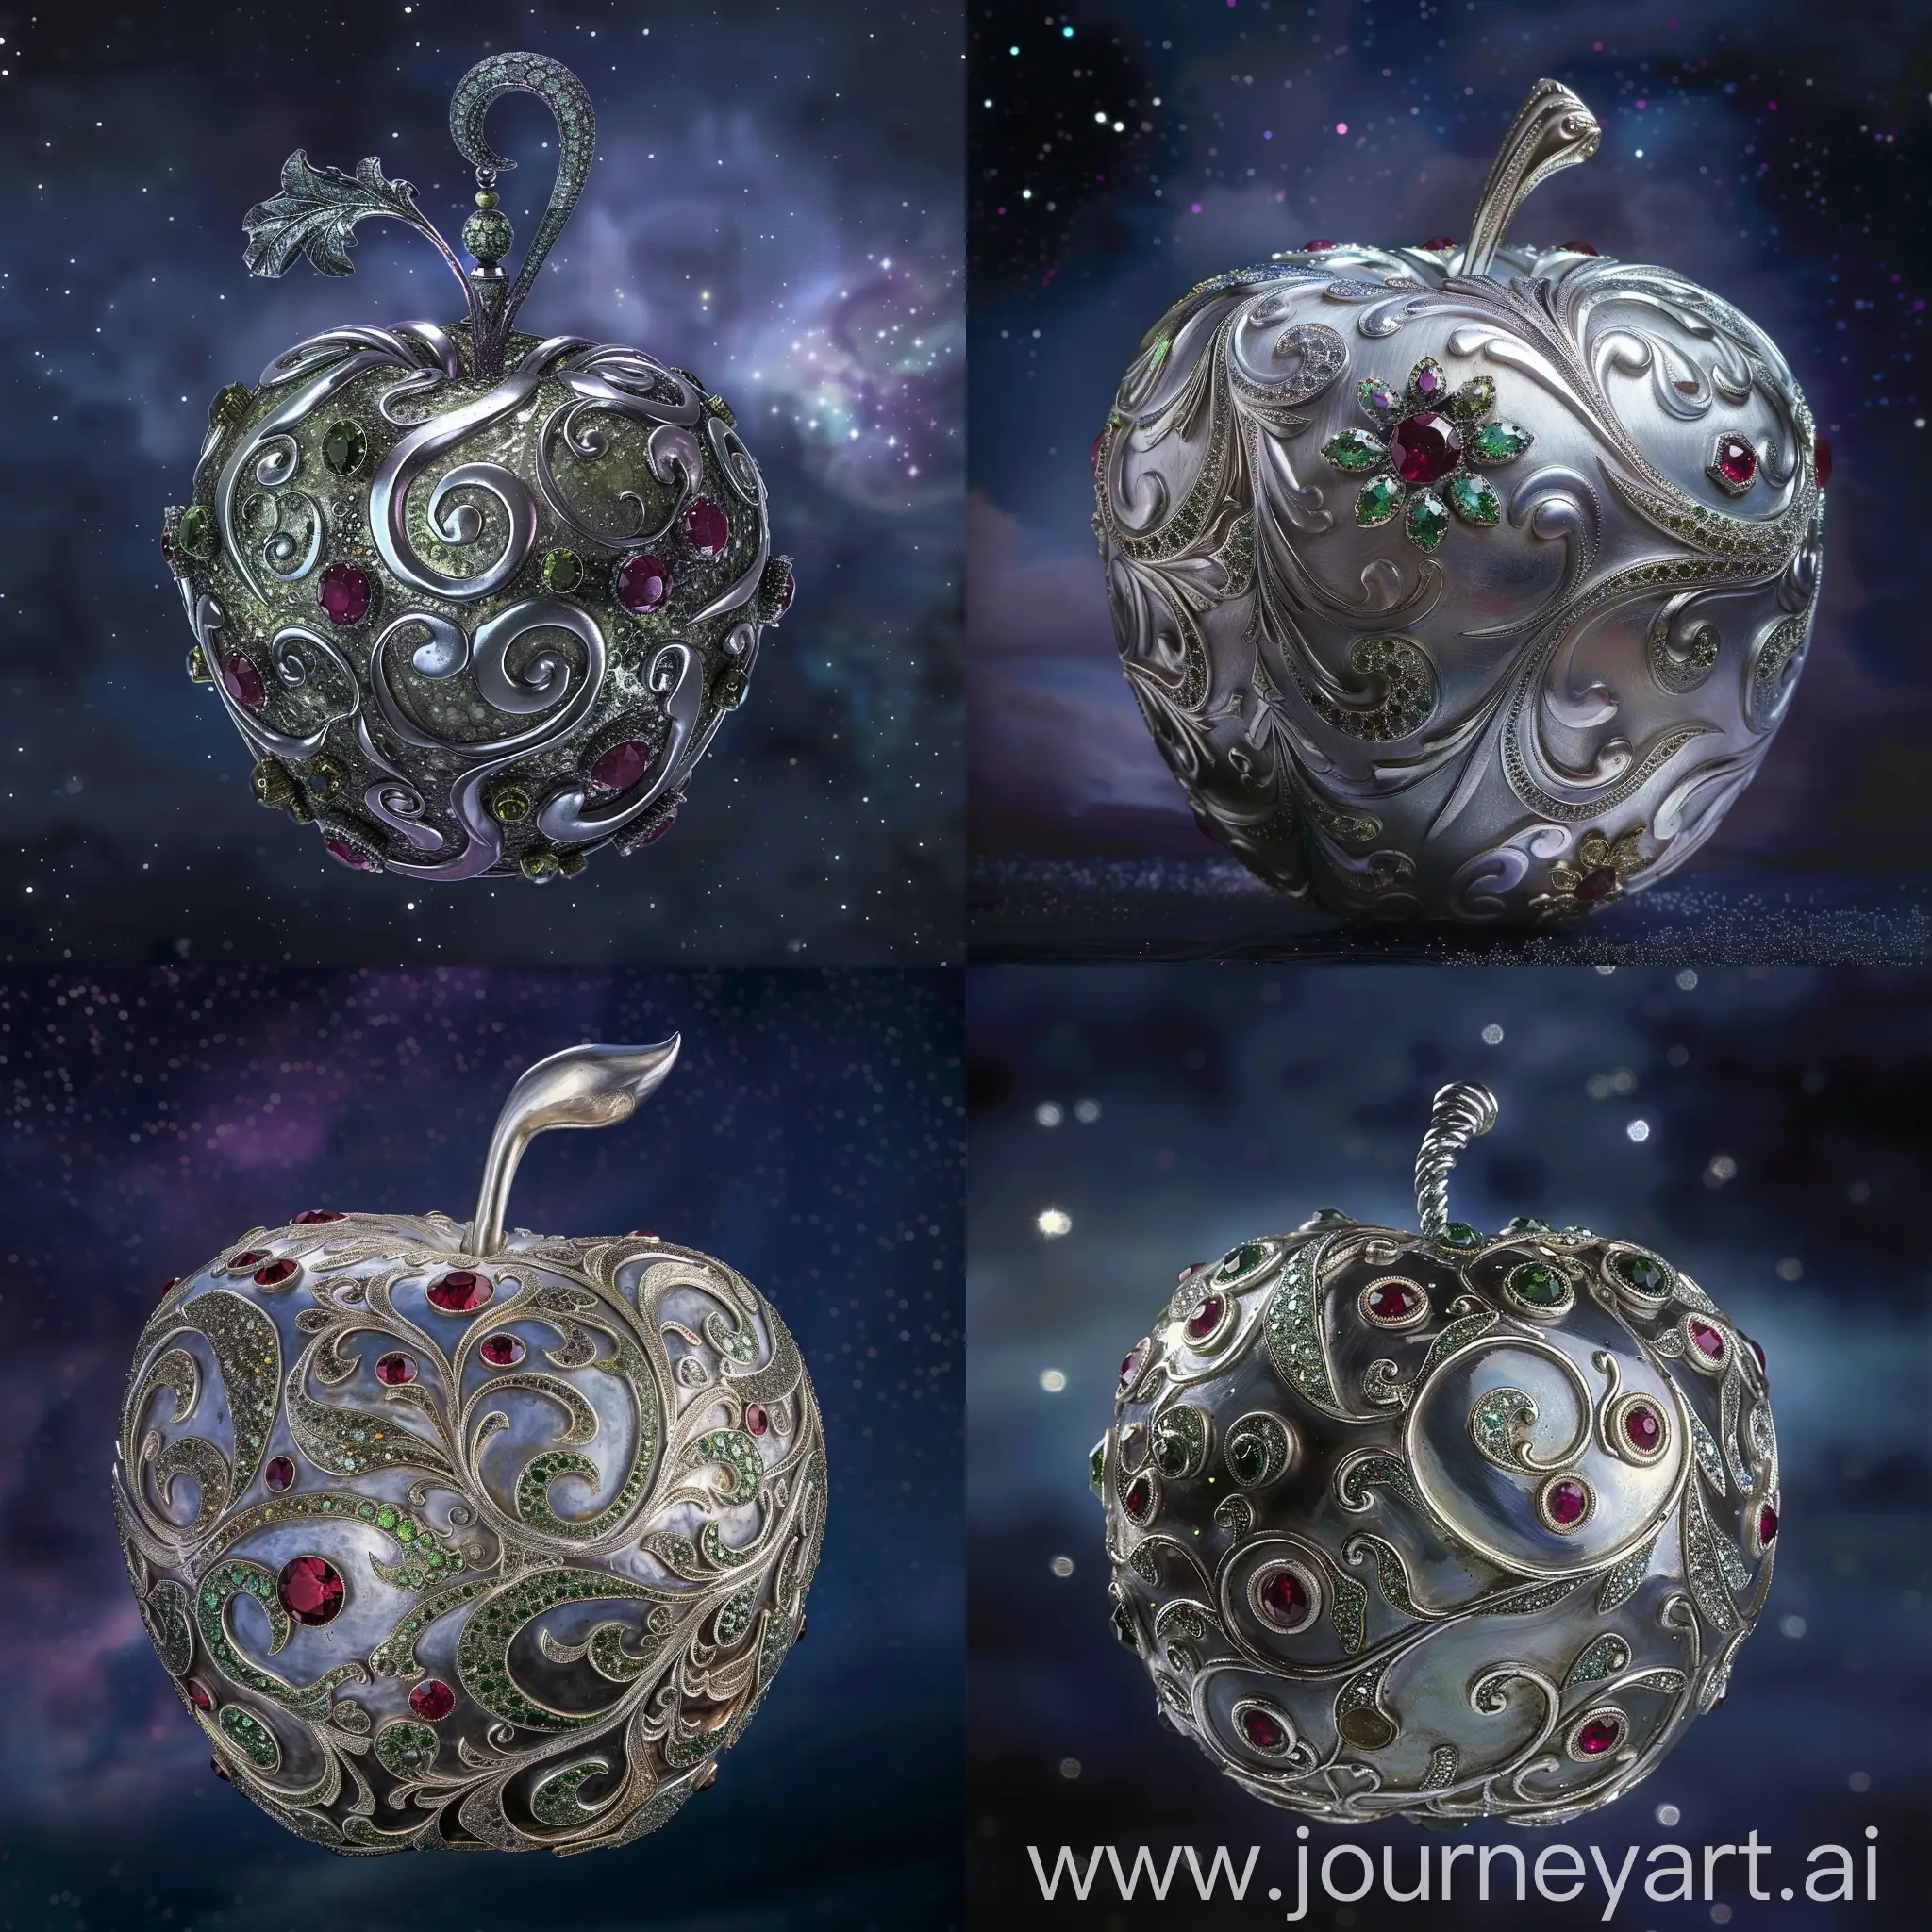 Magical-Silver-Apple-with-Ruby-and-Uvarovite-Decorations-Against-Night-Sky